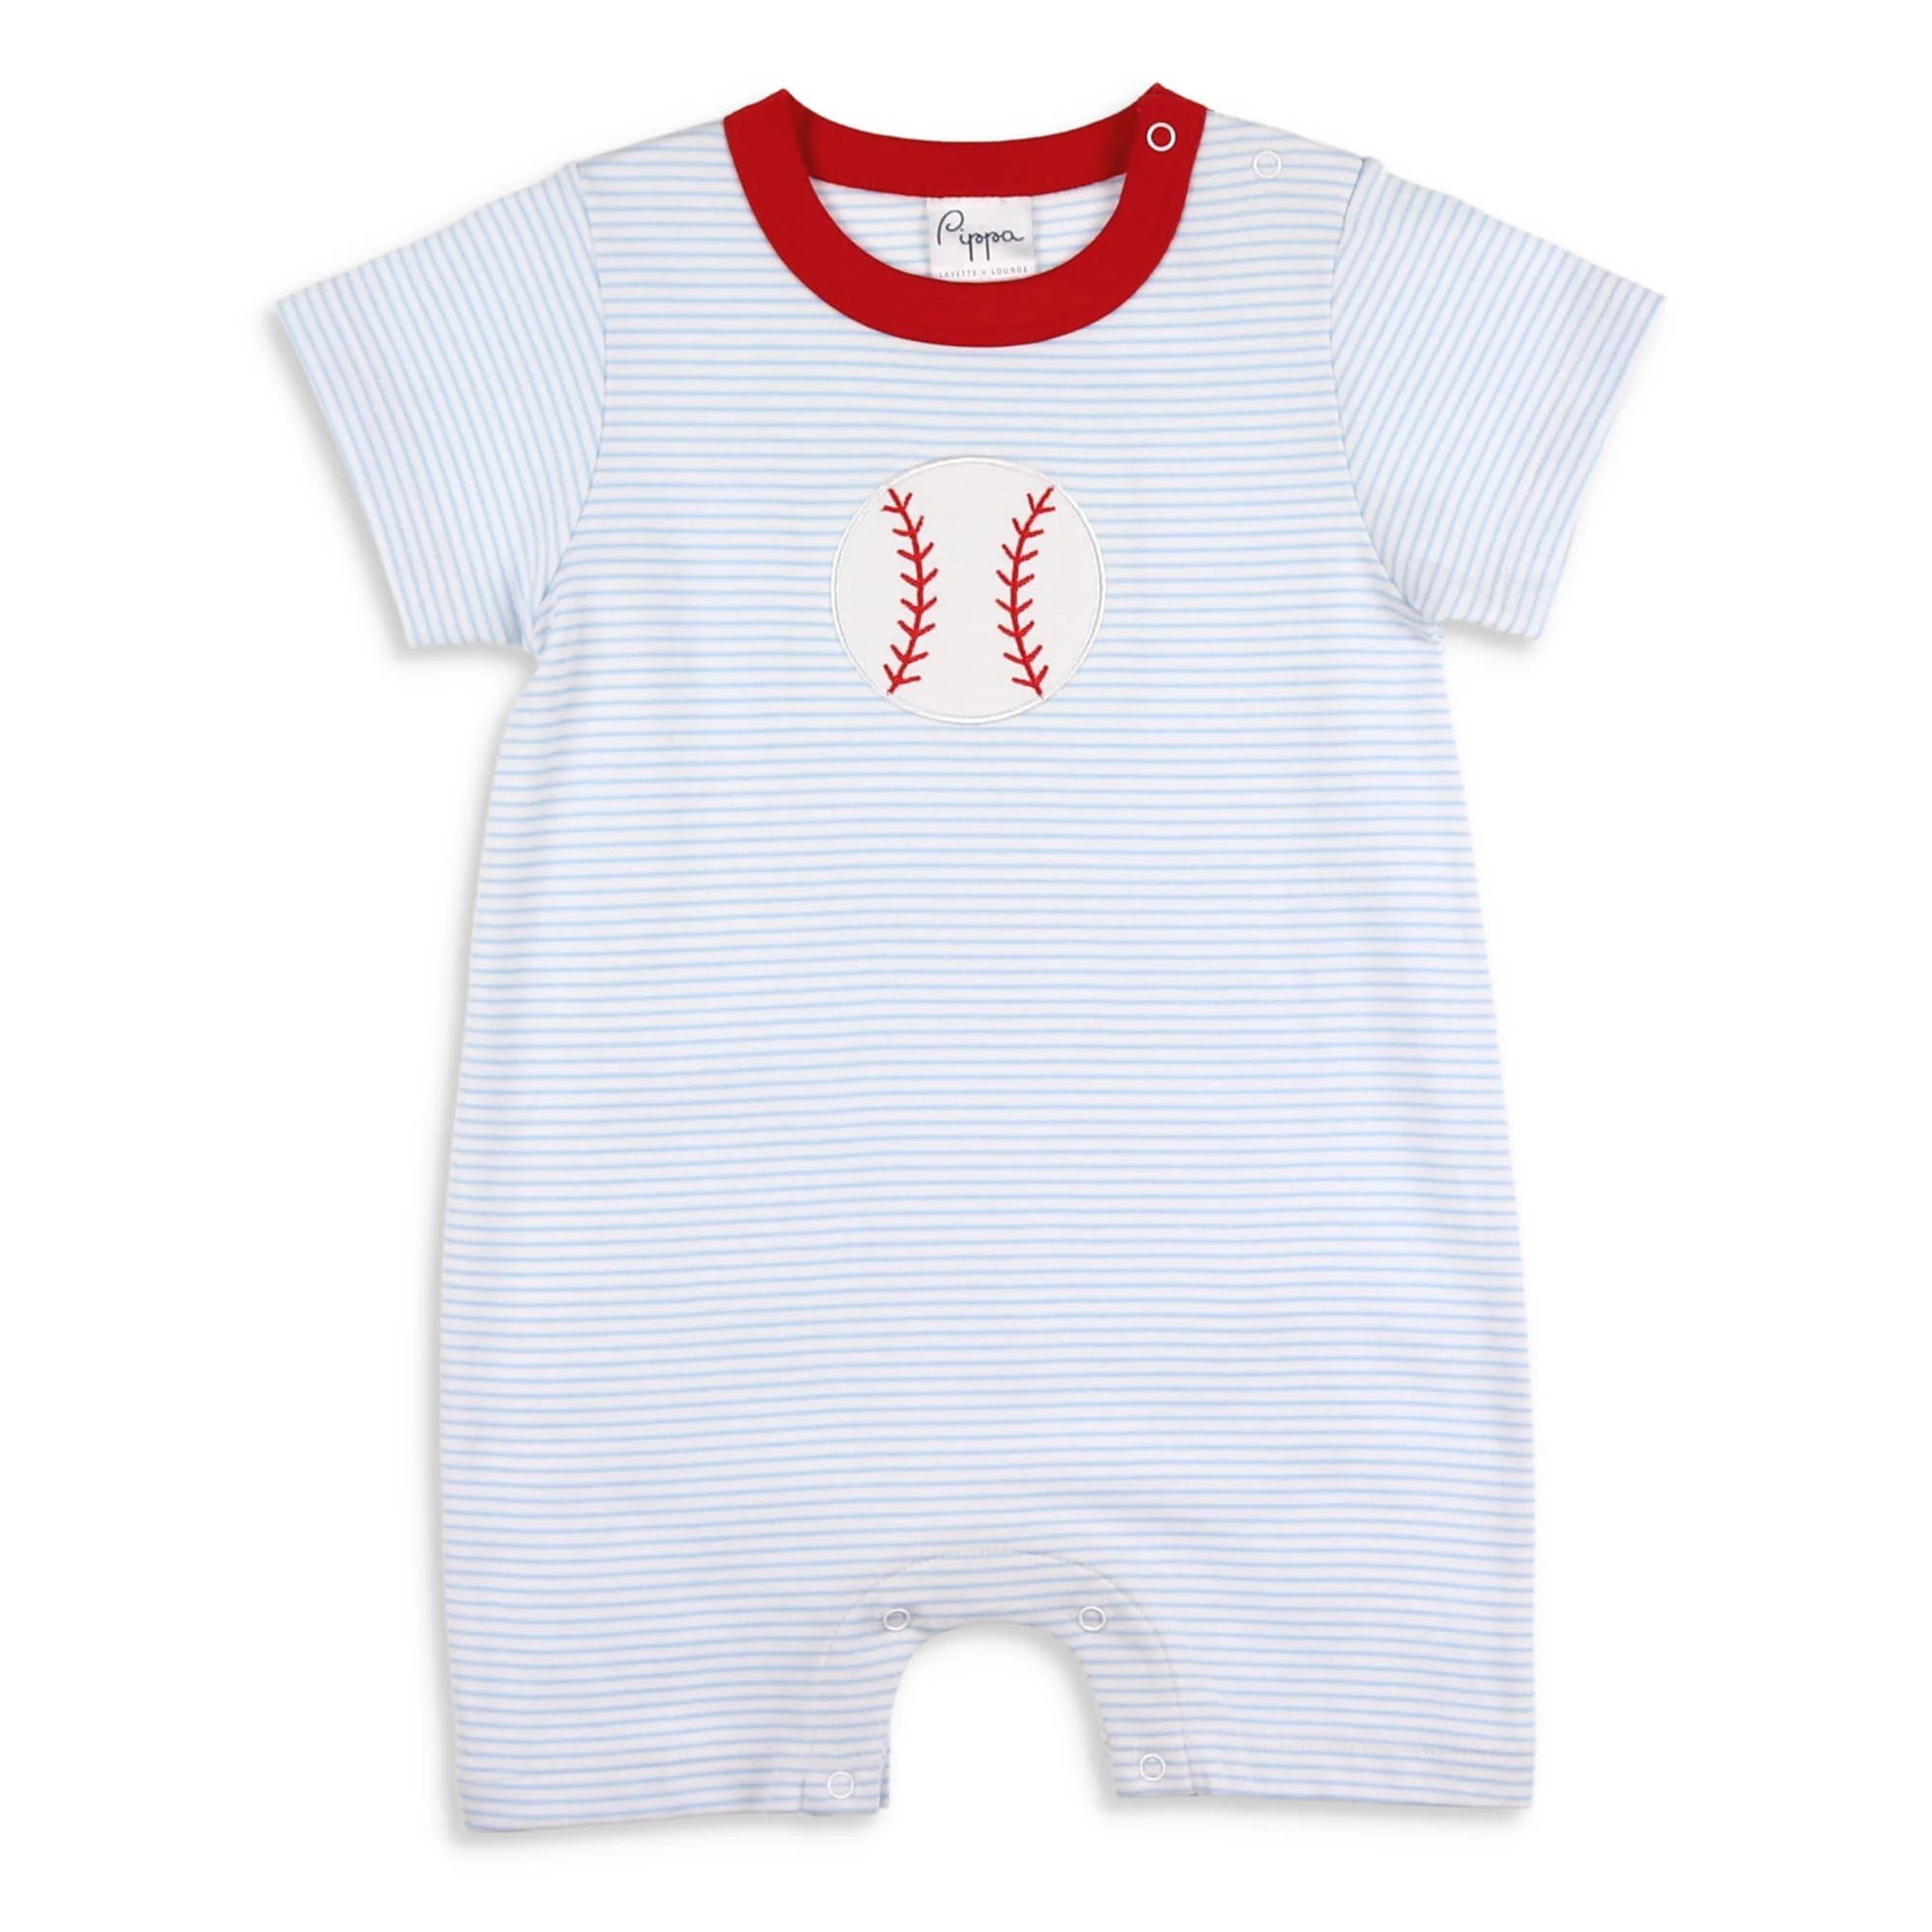 Boys Play Ball Romper - Shrimp and Grits Kids | Shrimp and Grits Kids